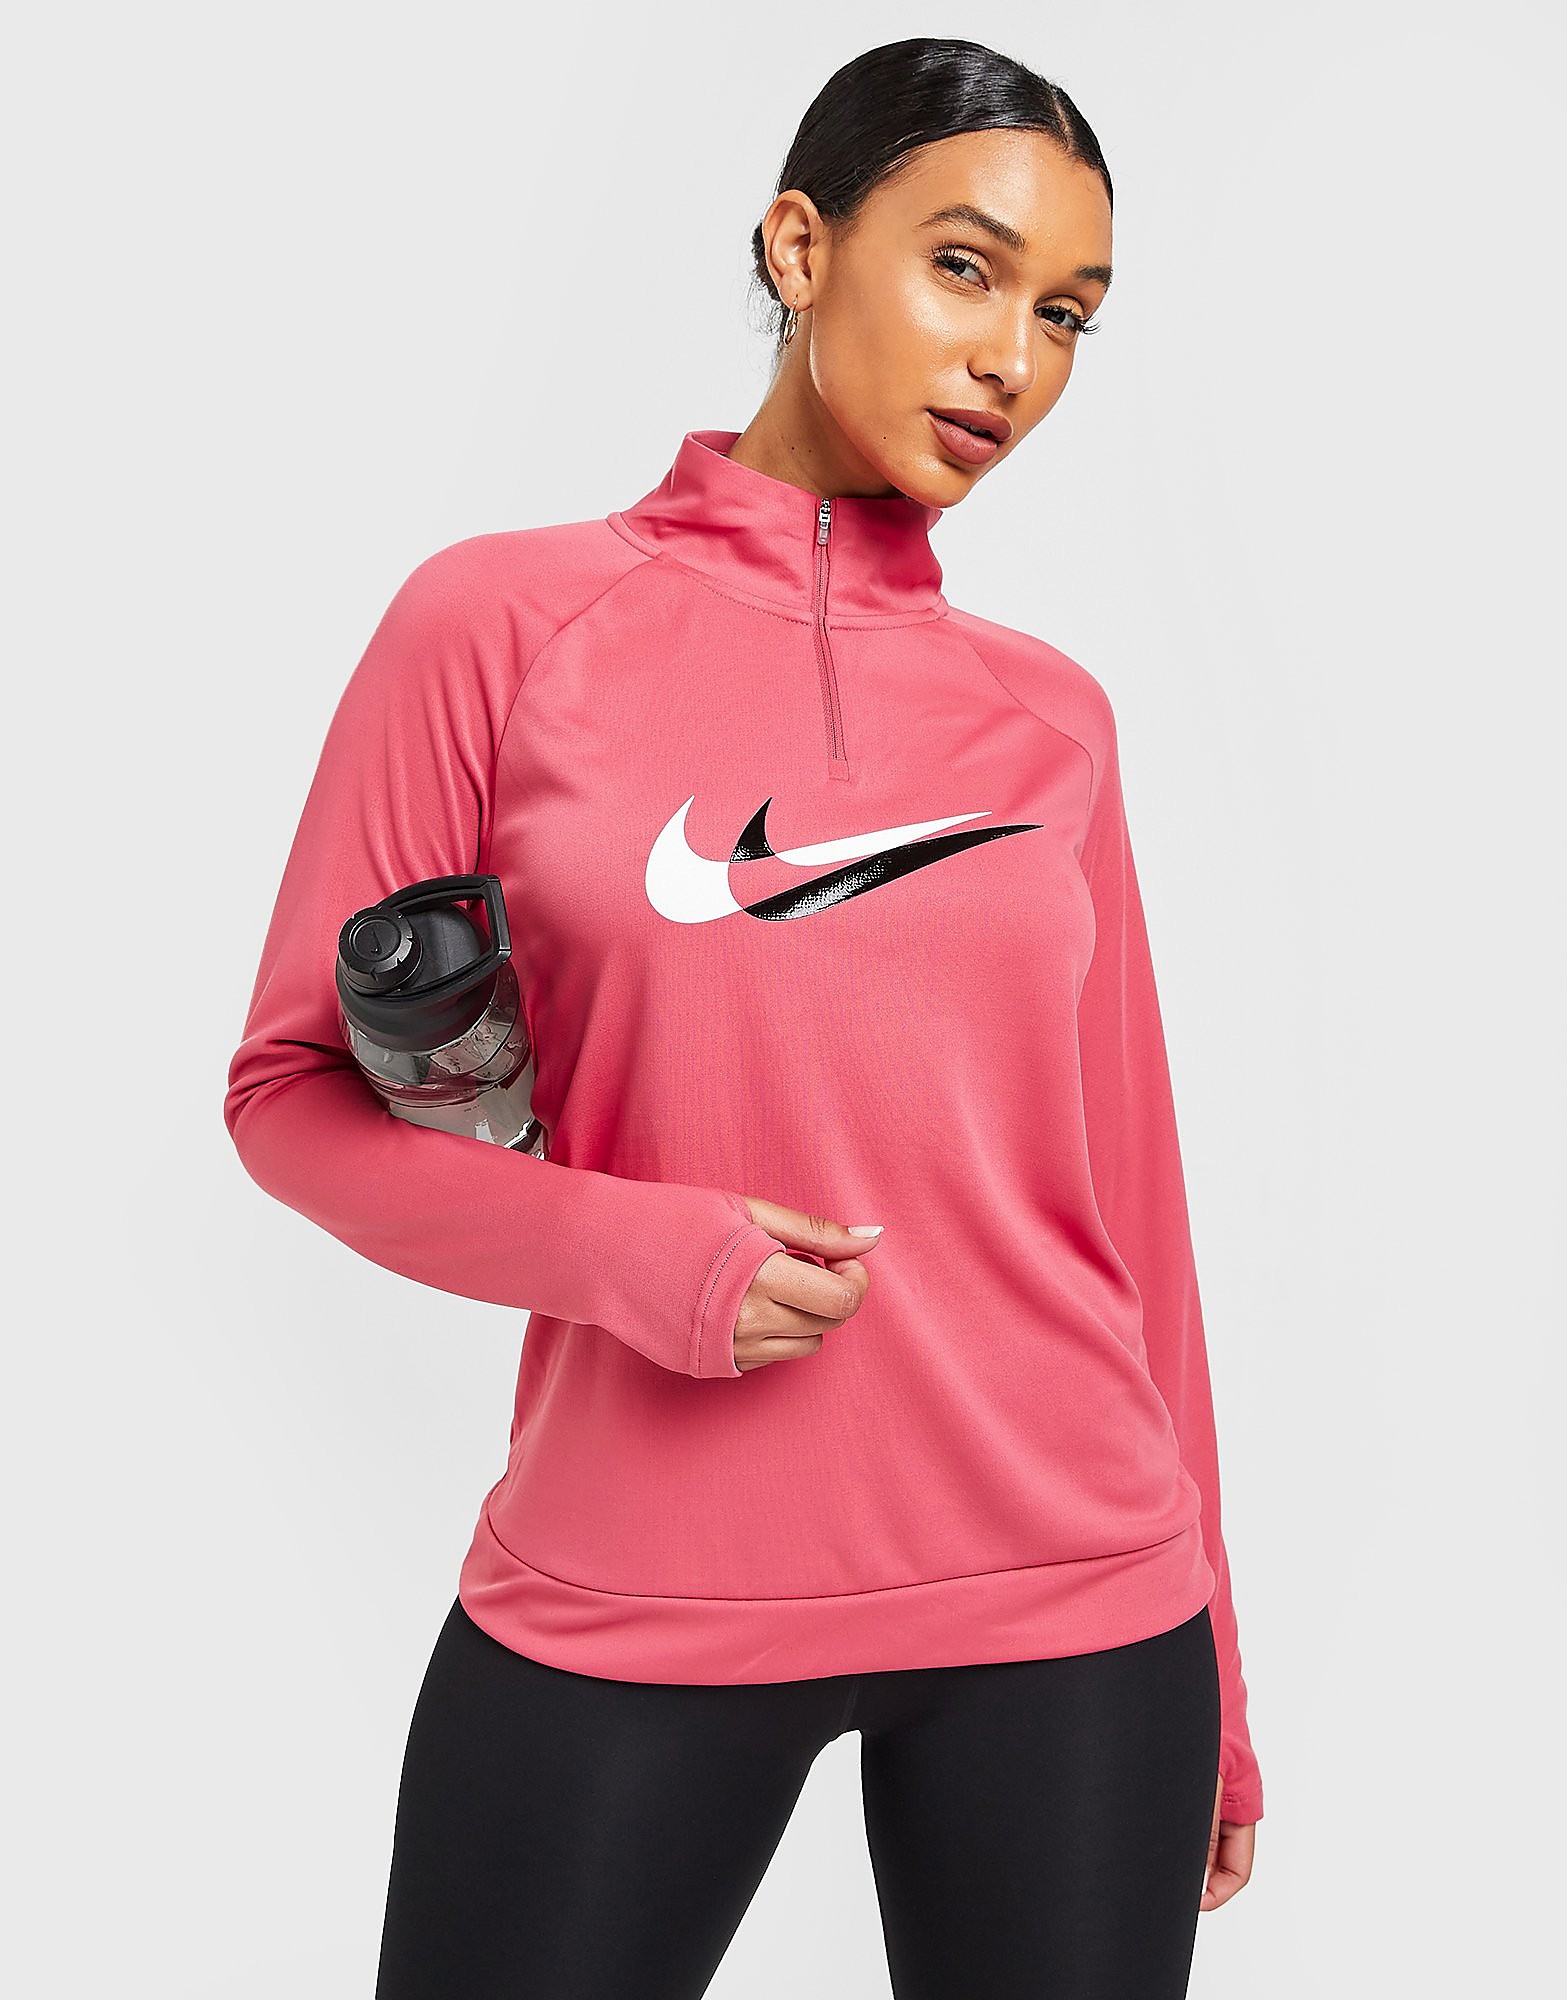 Nike Running Swoosh 1/4 Zip Top - Only at JD, Rosa